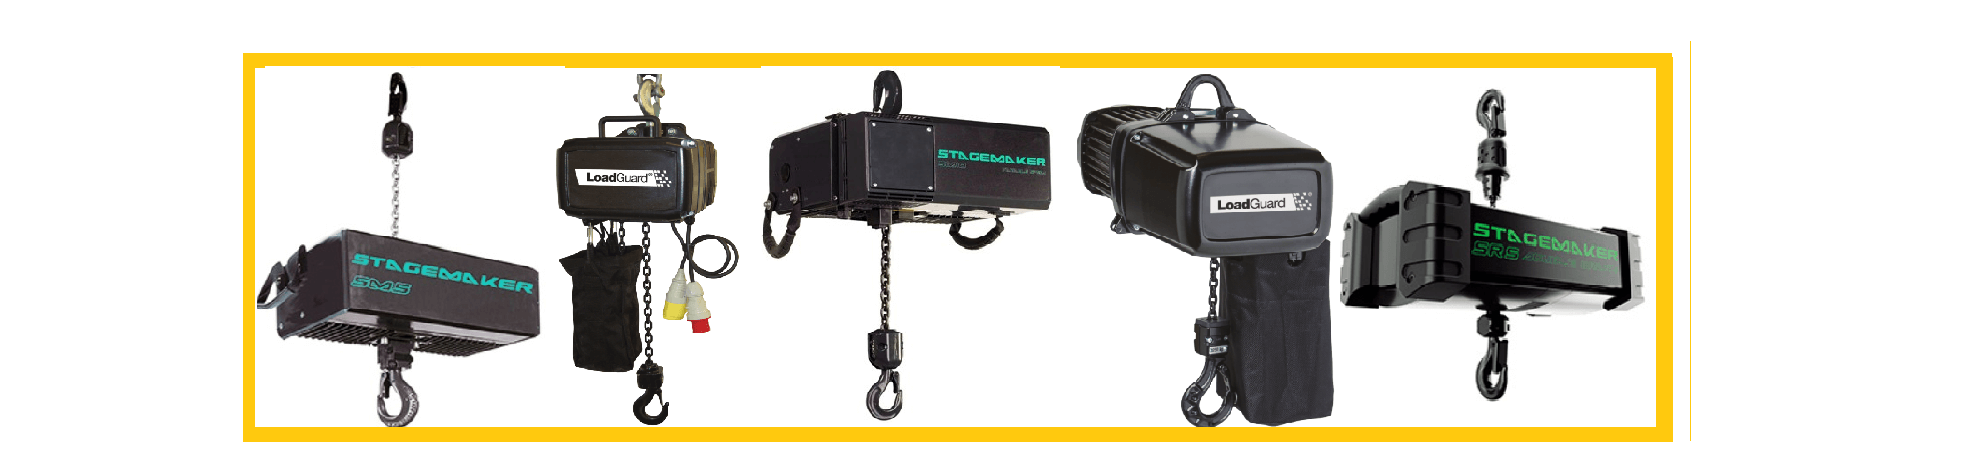 Stage Hoist collection from Lifting Hoists Direct